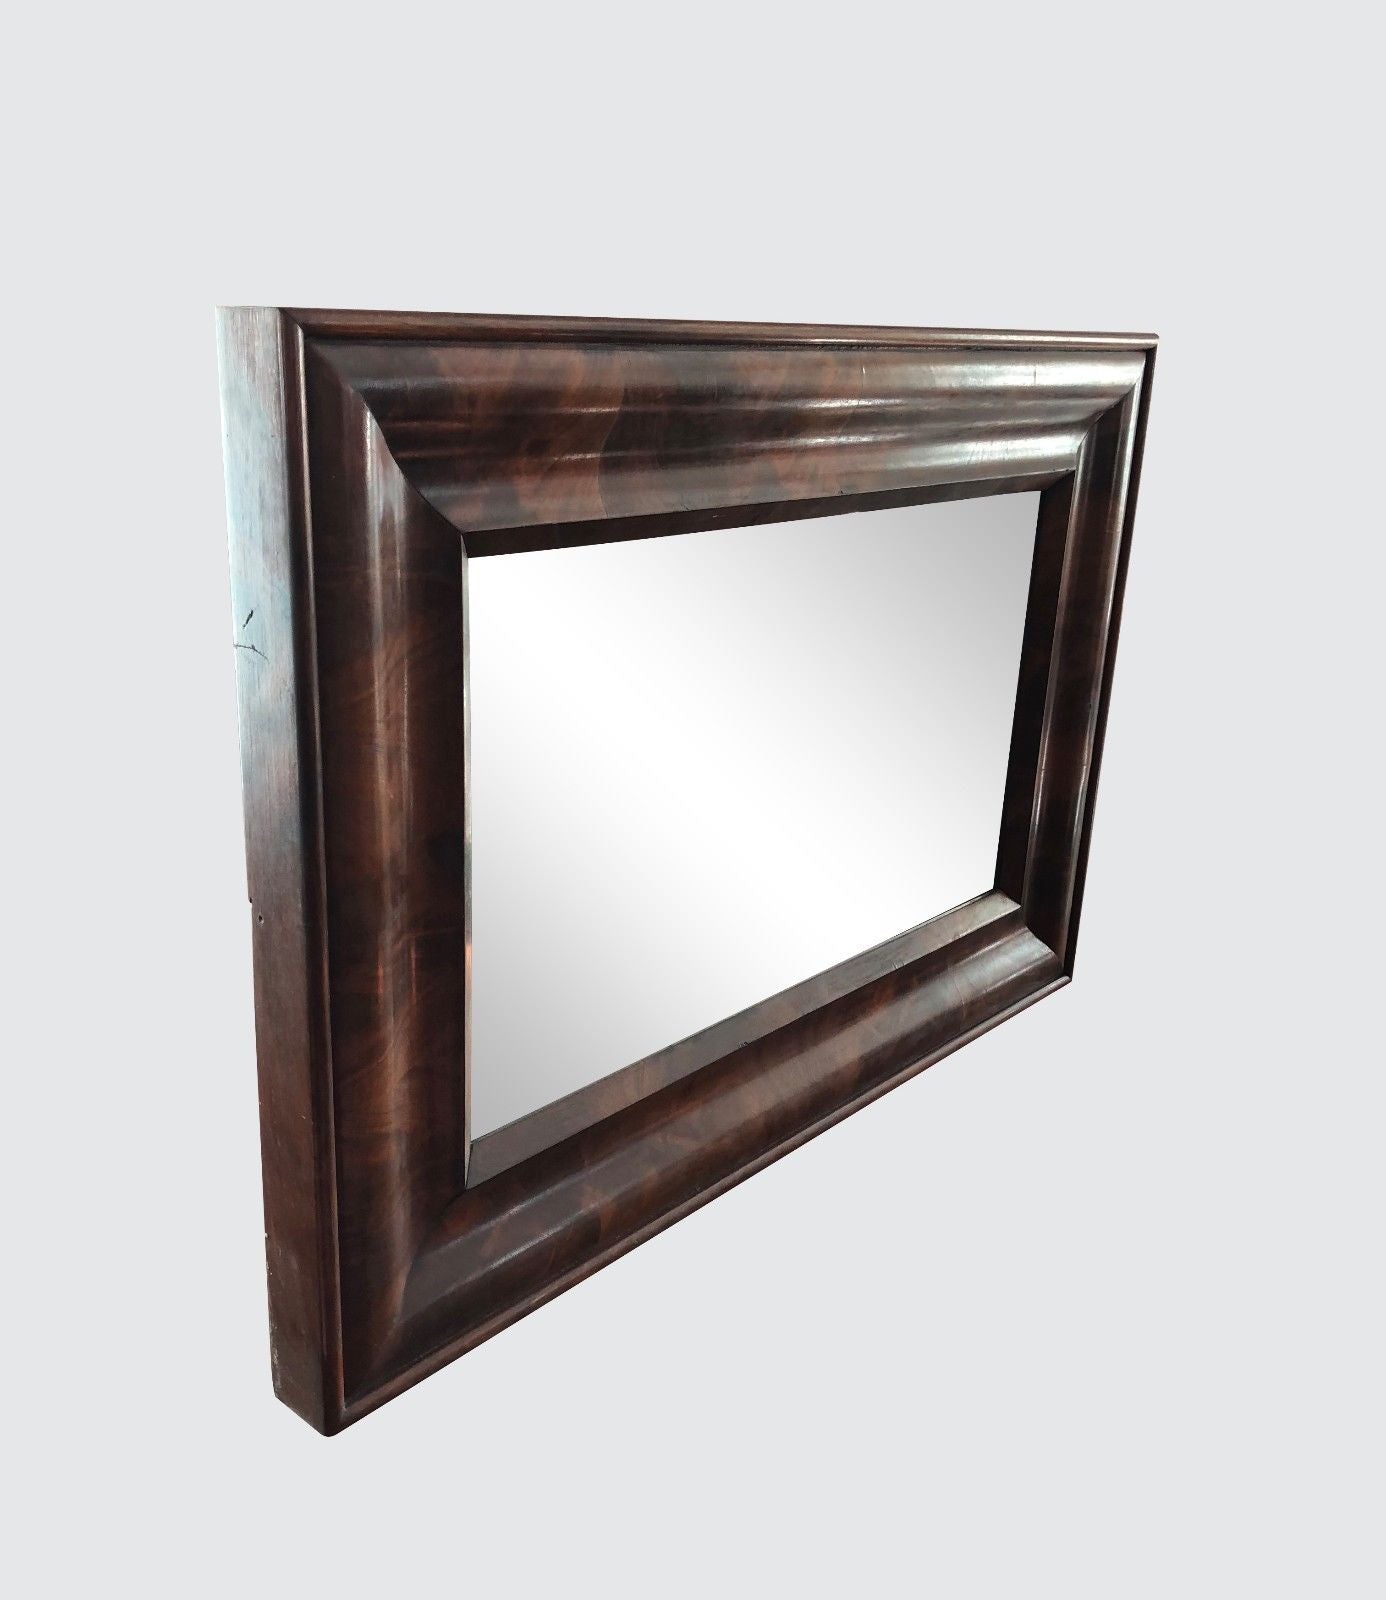 EARLY 19TH CENTURY CLASSICAL HEAVY PLATE BEVELED GLASS MIRROR